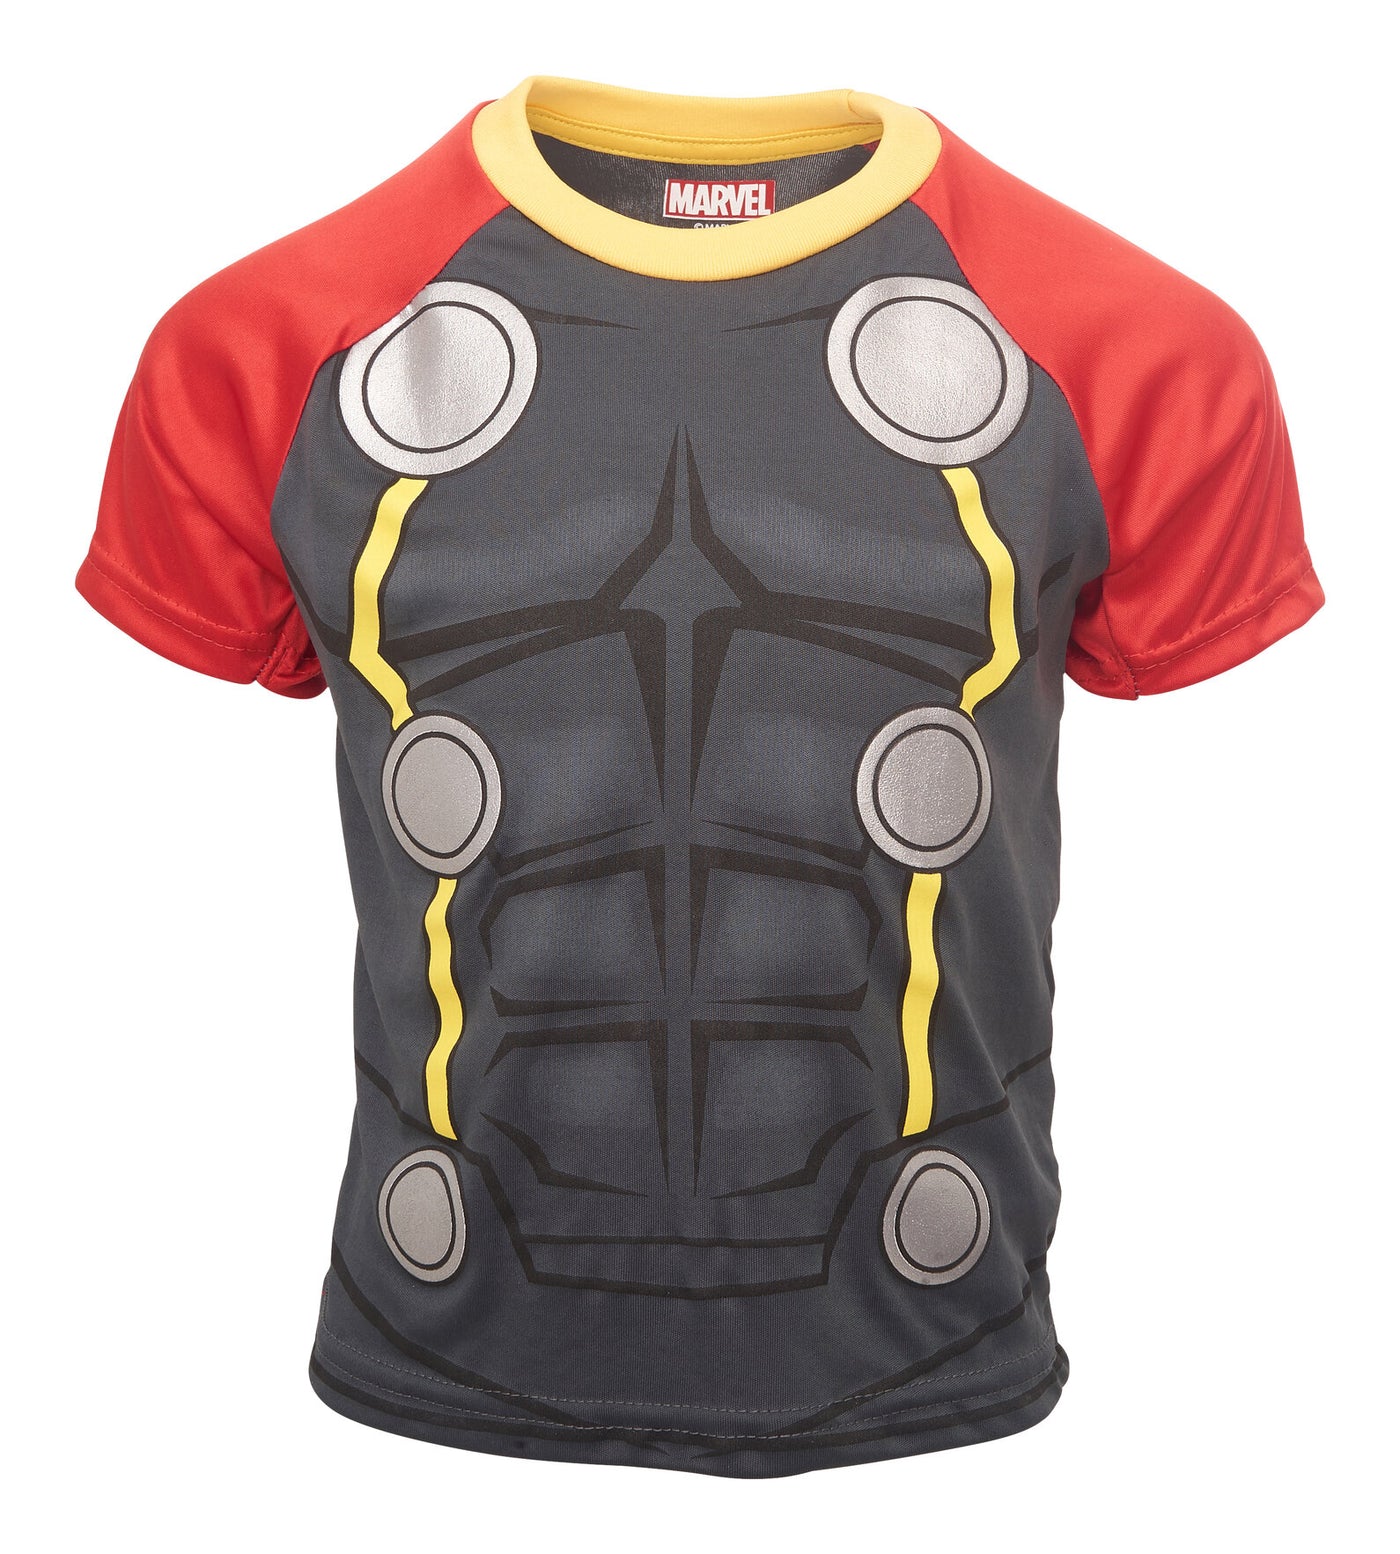 Marvel Avengers Thor Cosplay Athletic T-Shirt Shorts Outfit Set